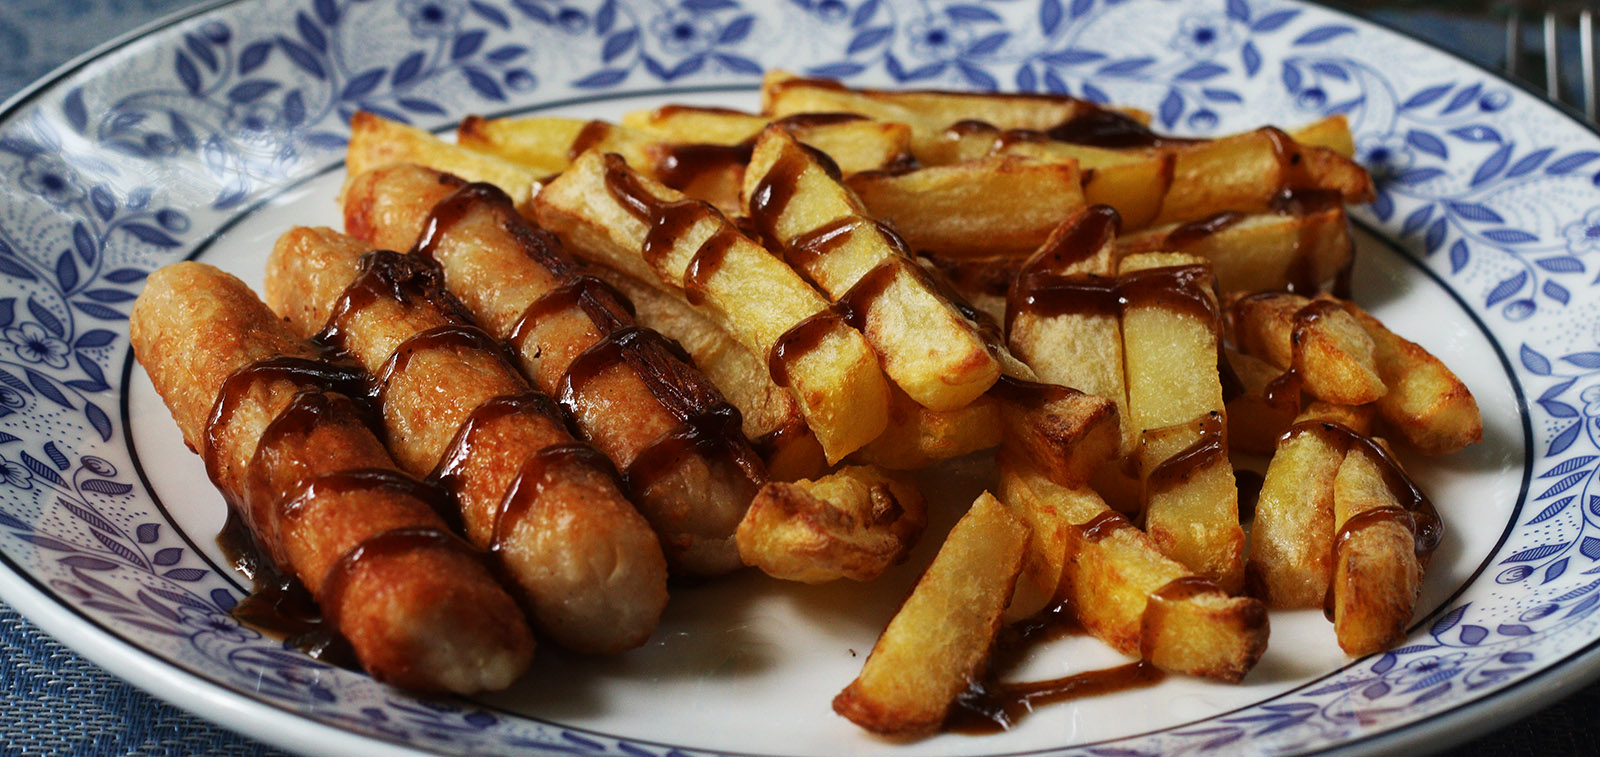 Sausages and chips 2 s.jpg